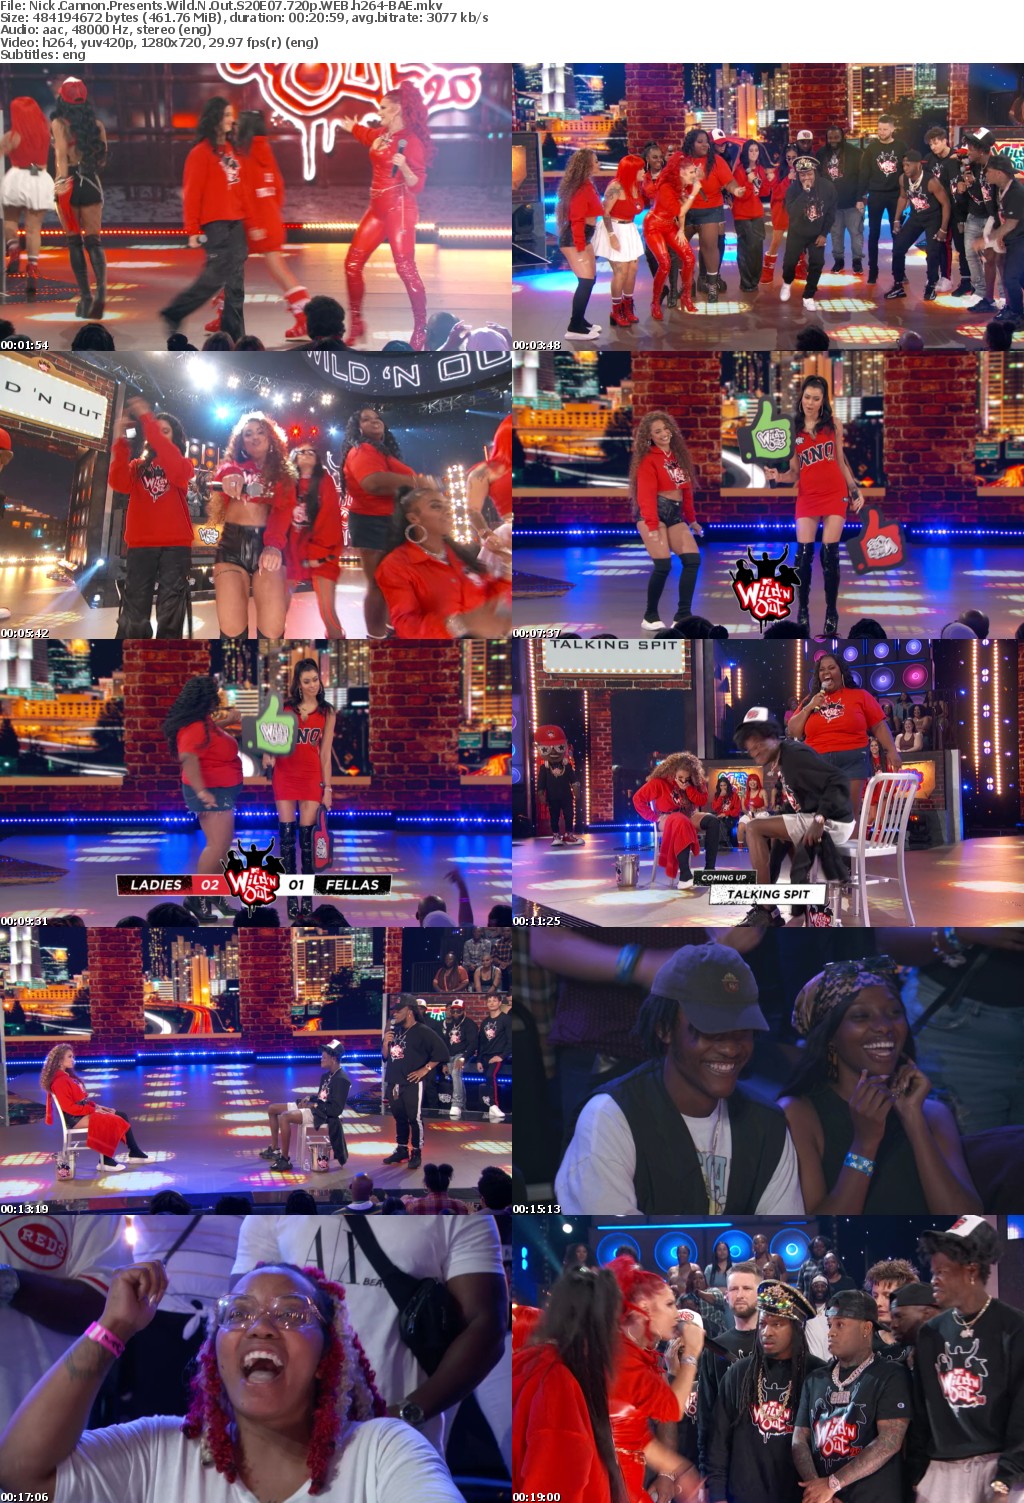 Nick Cannon Presents Wild N Out S20E07 720p WEB h264-BAE